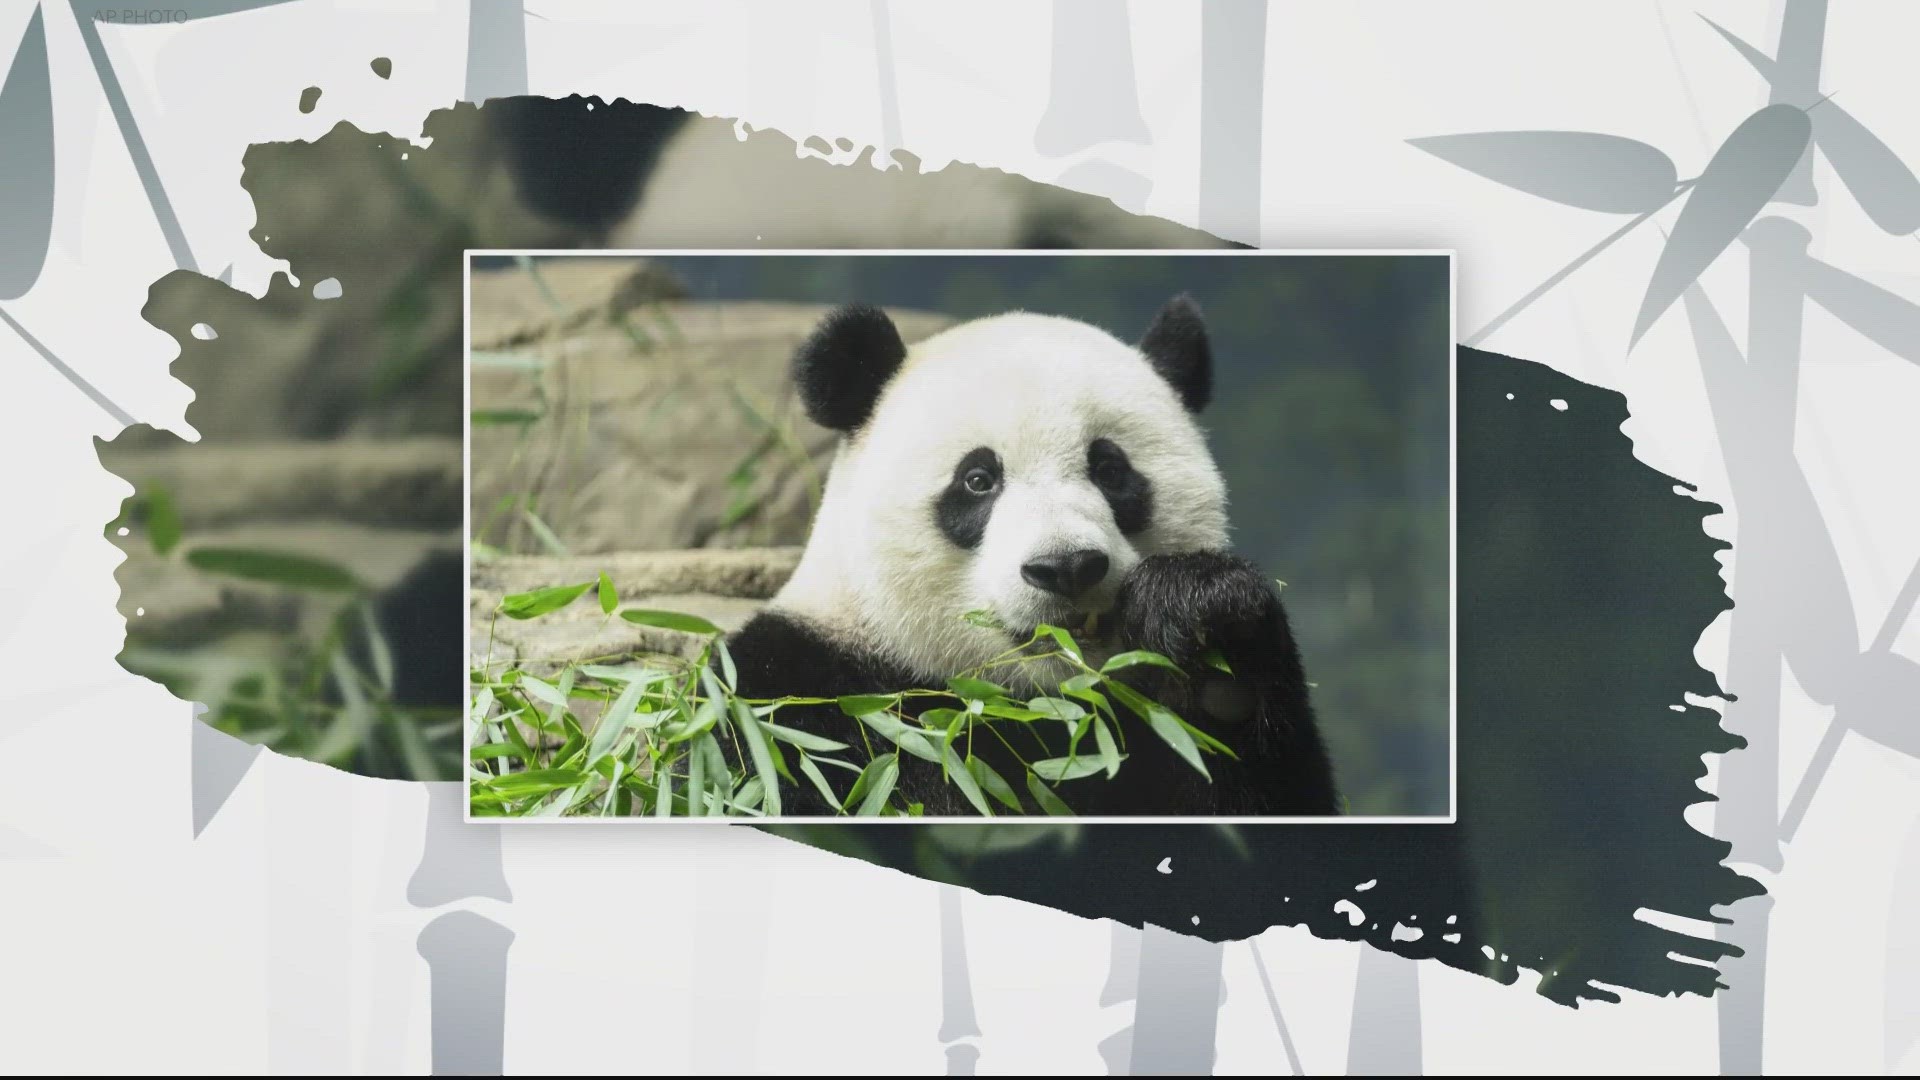 It's the end of an era at the Smithsonian National Zoo in D.C. The zoo's giant pandas left the District Wednesday afternoon.